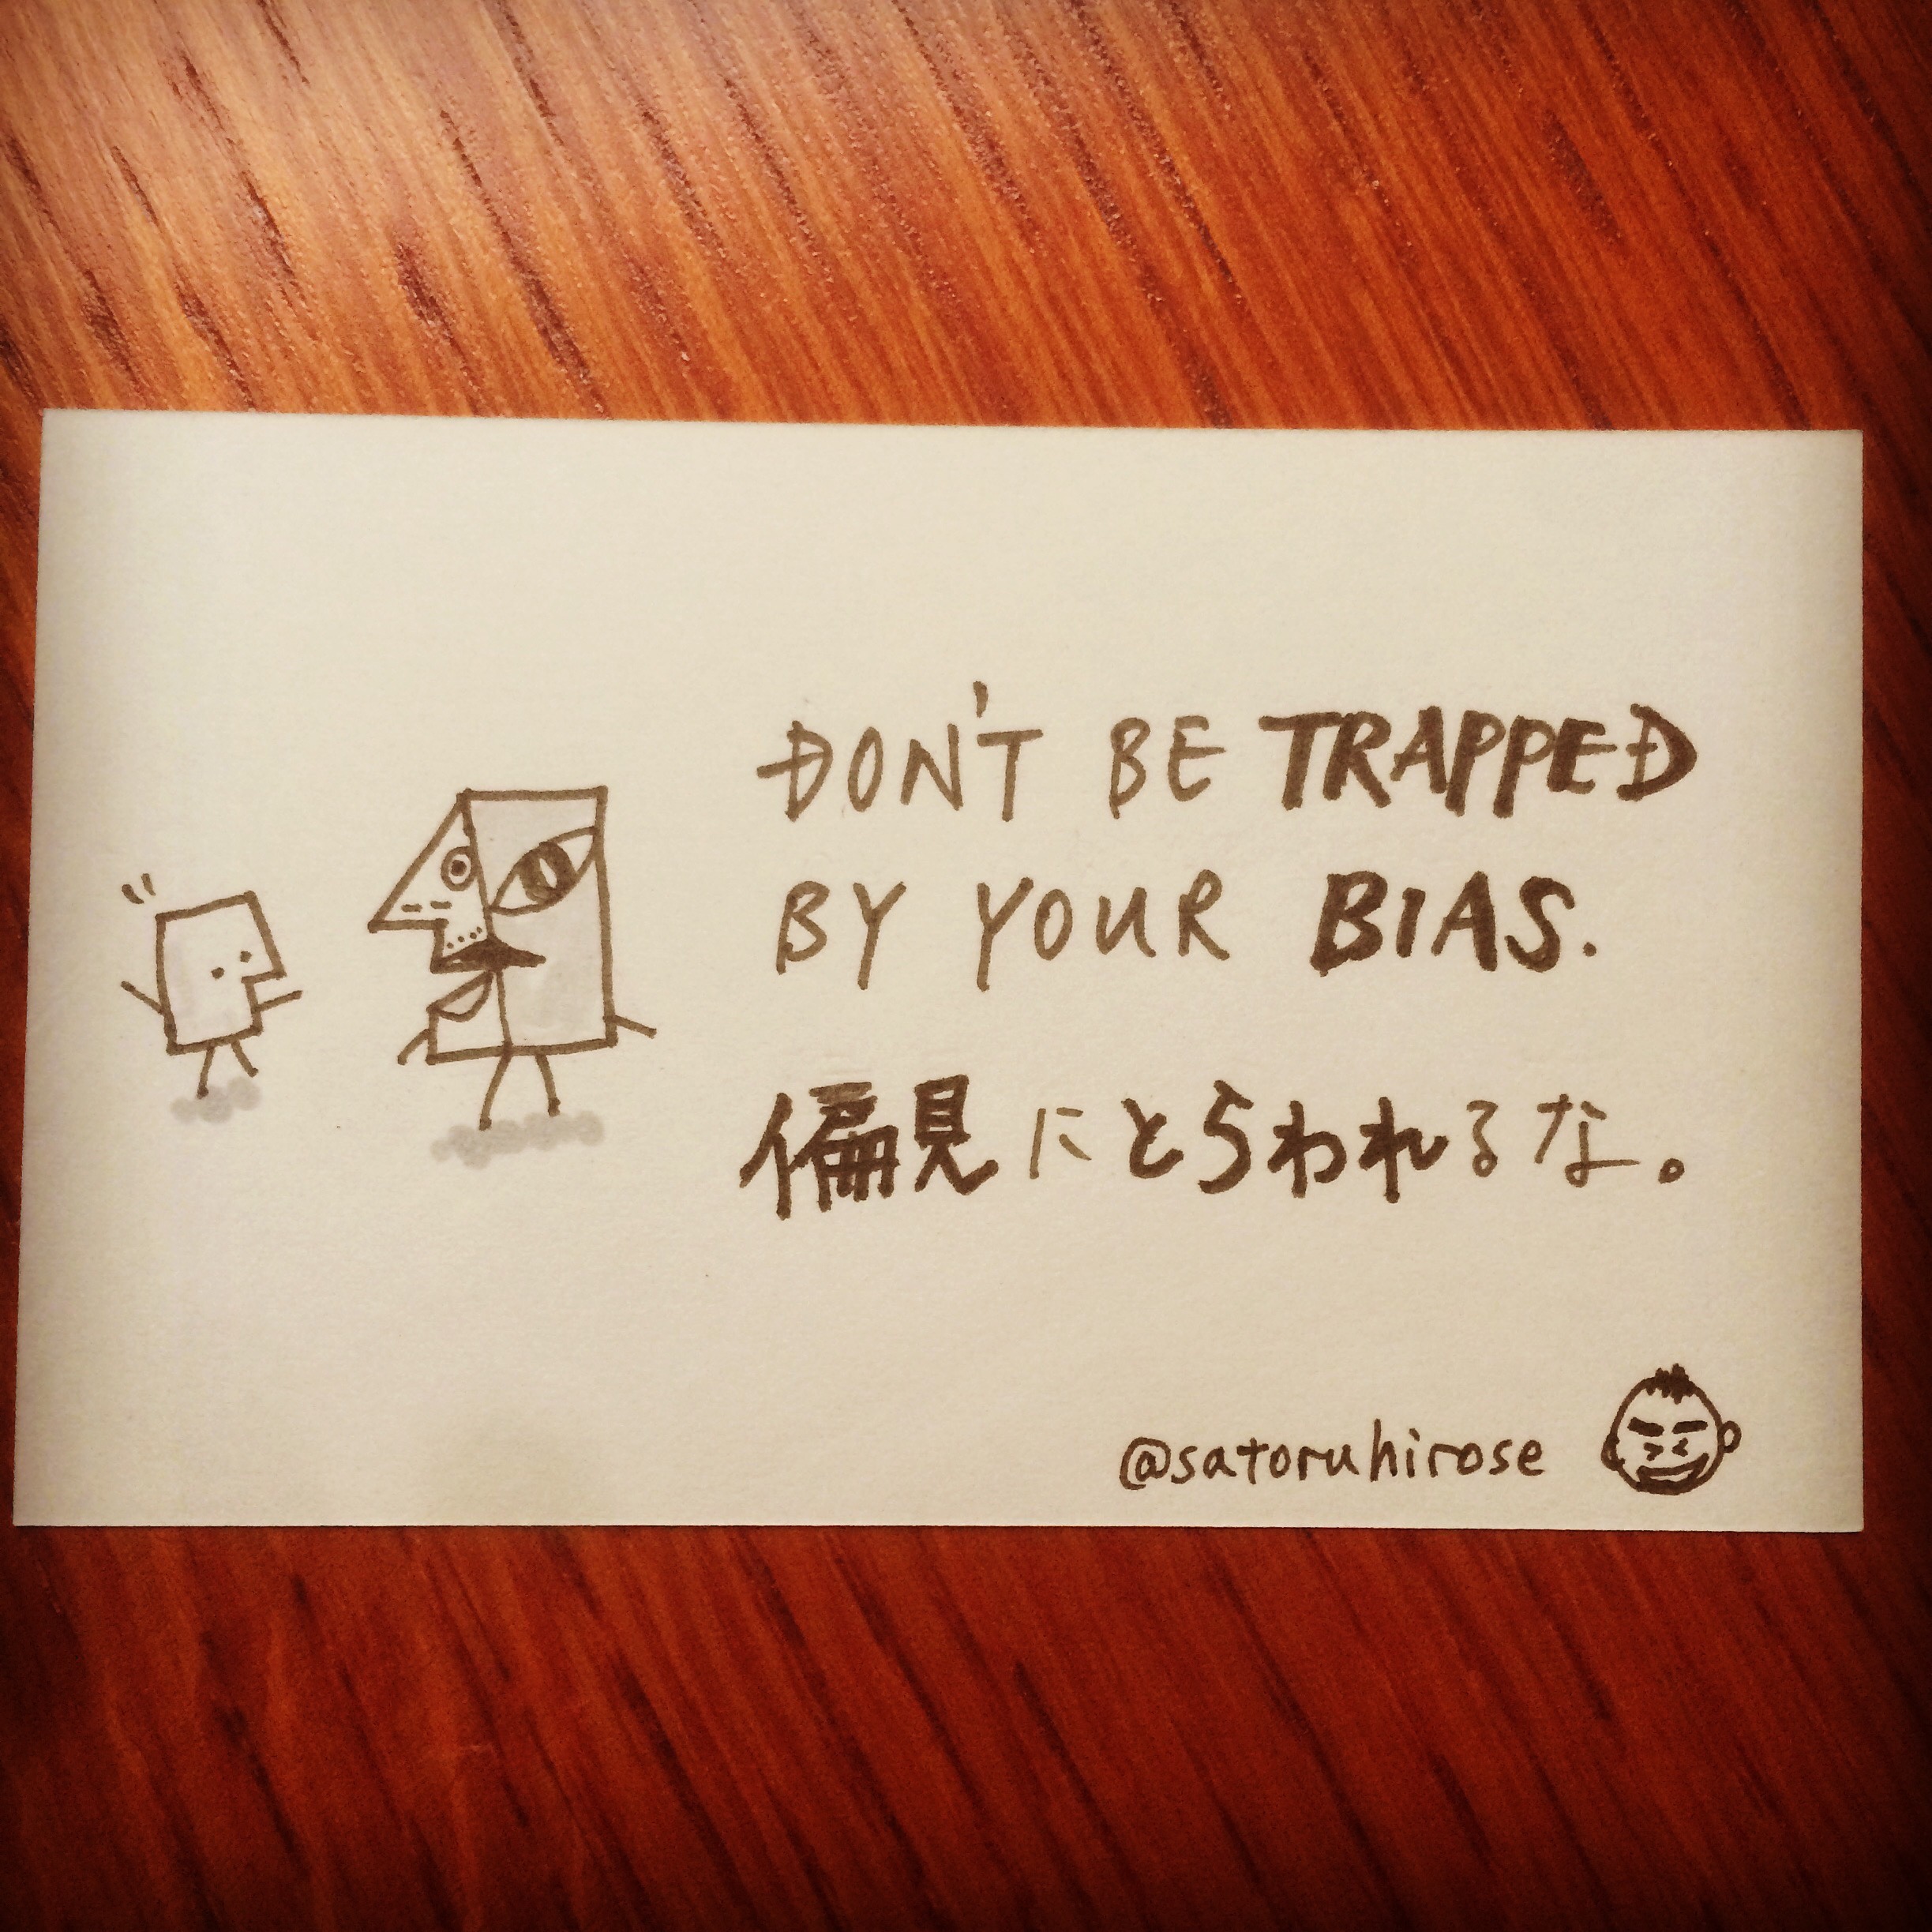 Don't be trapped by your bias.